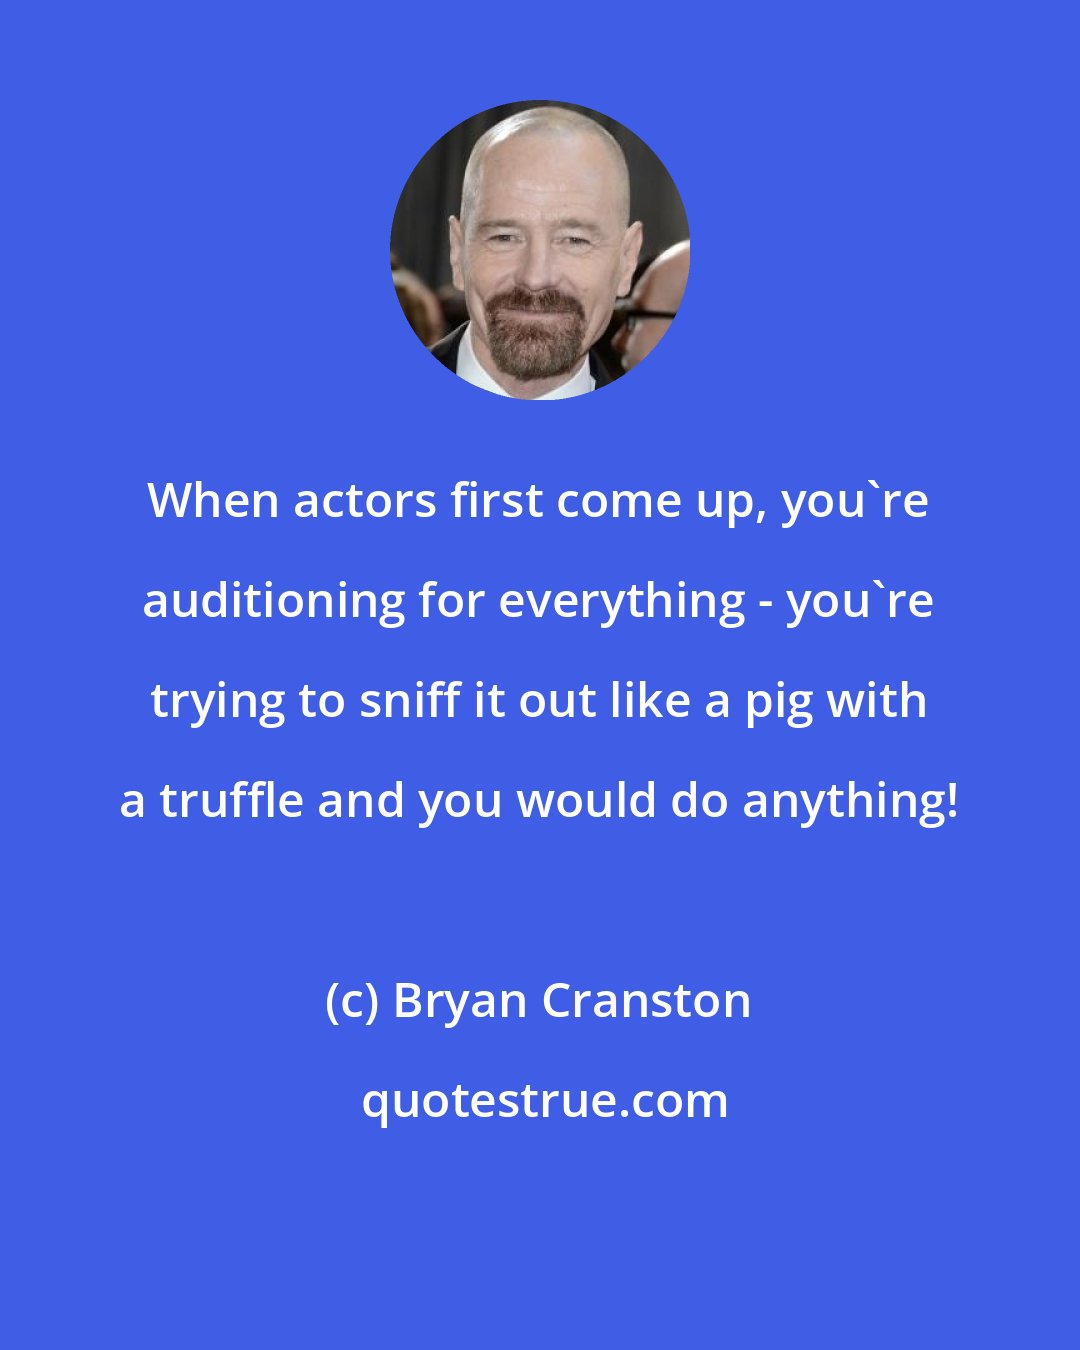 Bryan Cranston: When actors first come up, you're auditioning for everything - you're trying to sniff it out like a pig with a truffle and you would do anything!